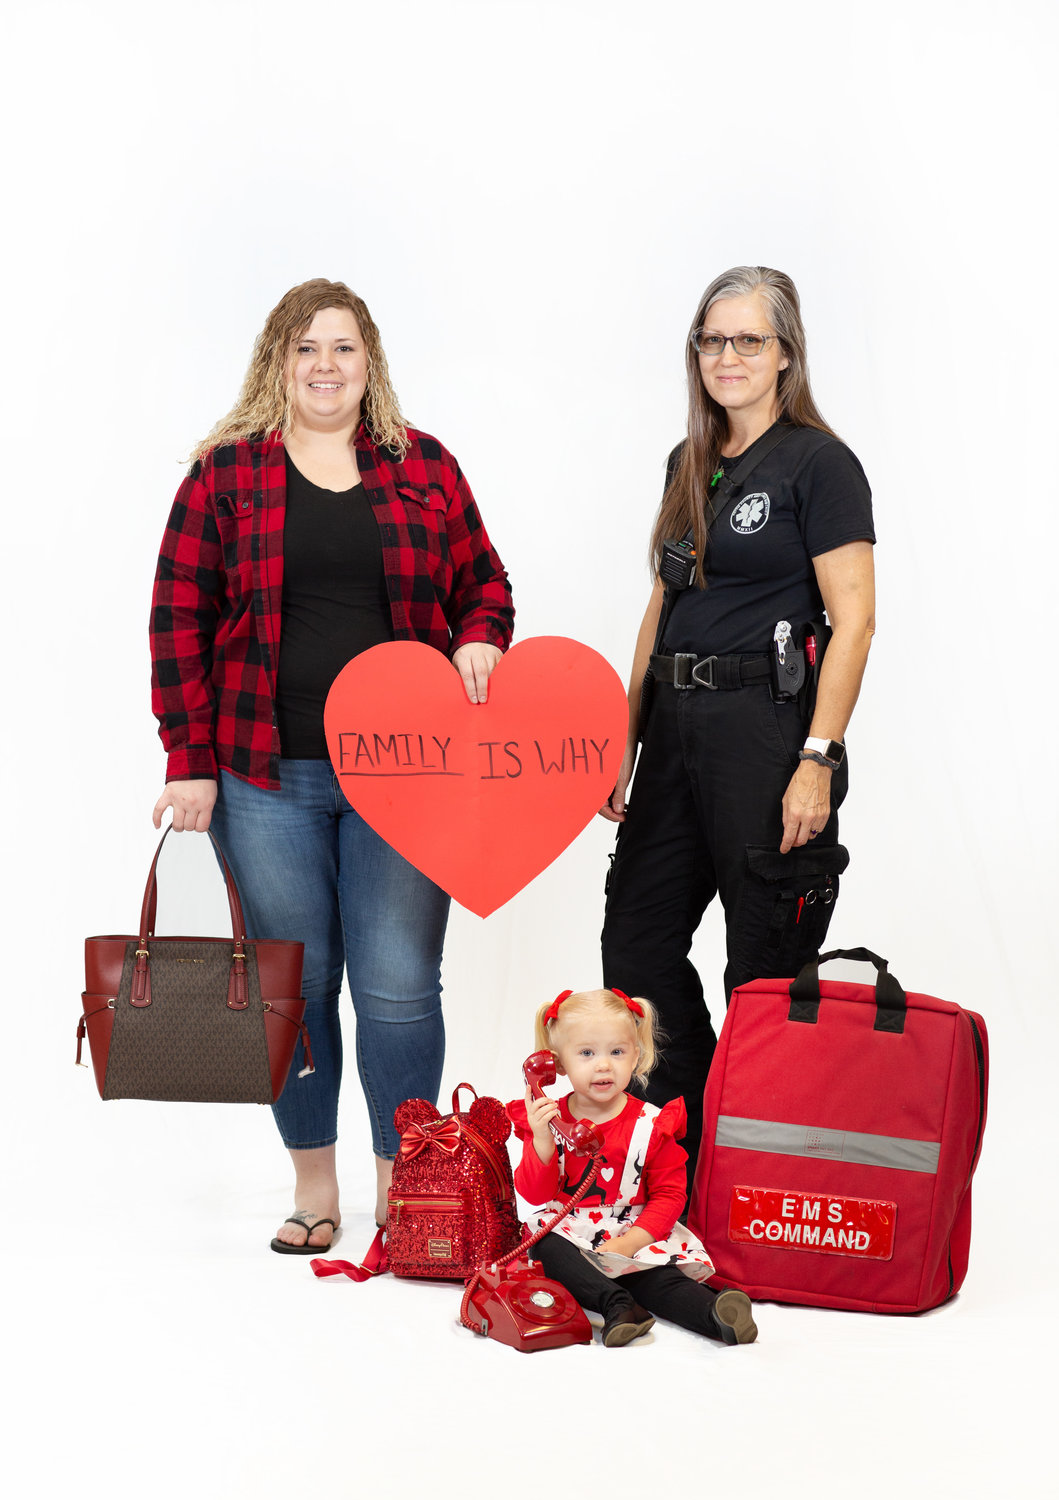 From left, Tina Plain, Pettis County Ambulance District (PCAD) EMT-B, and her daughter, Ava Plain, and Charisse Bauer, PCAD EMT, showcase purses available for purchase at the 2021 Wear Red for Women auction along with an automated external defibrillator (AED). Proceeds from this year’s event will be used to purchase additional AEDs for public places in the community. To reserve tickets, visit www.brhc.org/2021wearred.